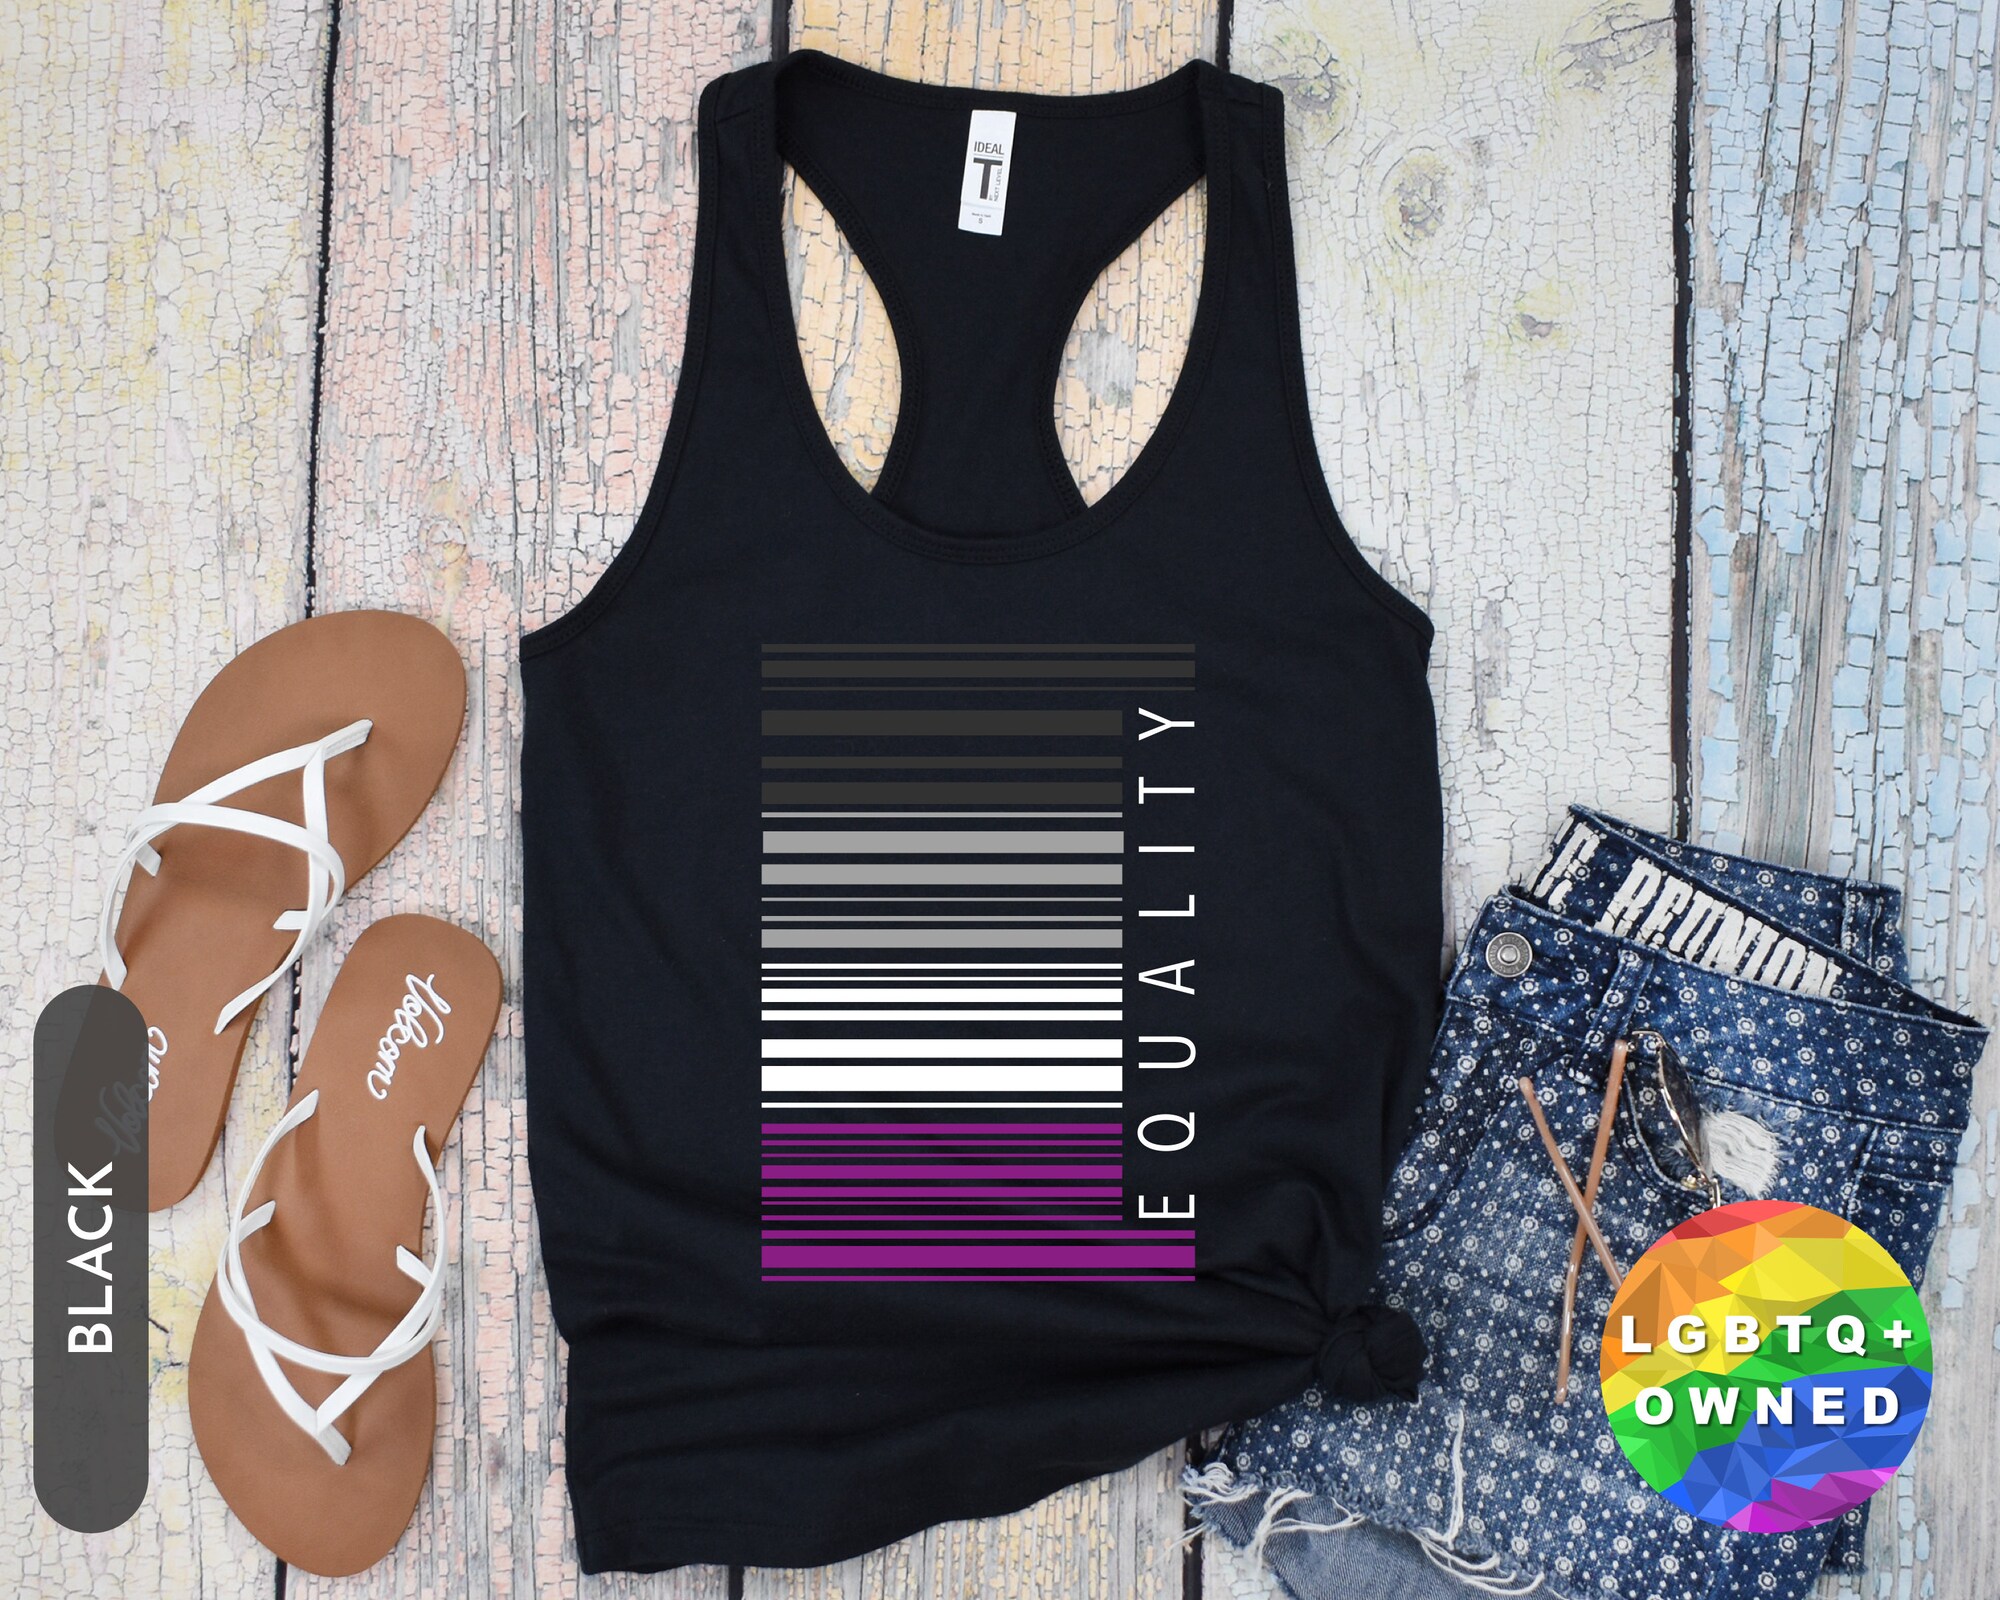 Equality Asexual Flag Racerback Tank Top - Asexual Pride Tank Top, Subtle Asexual